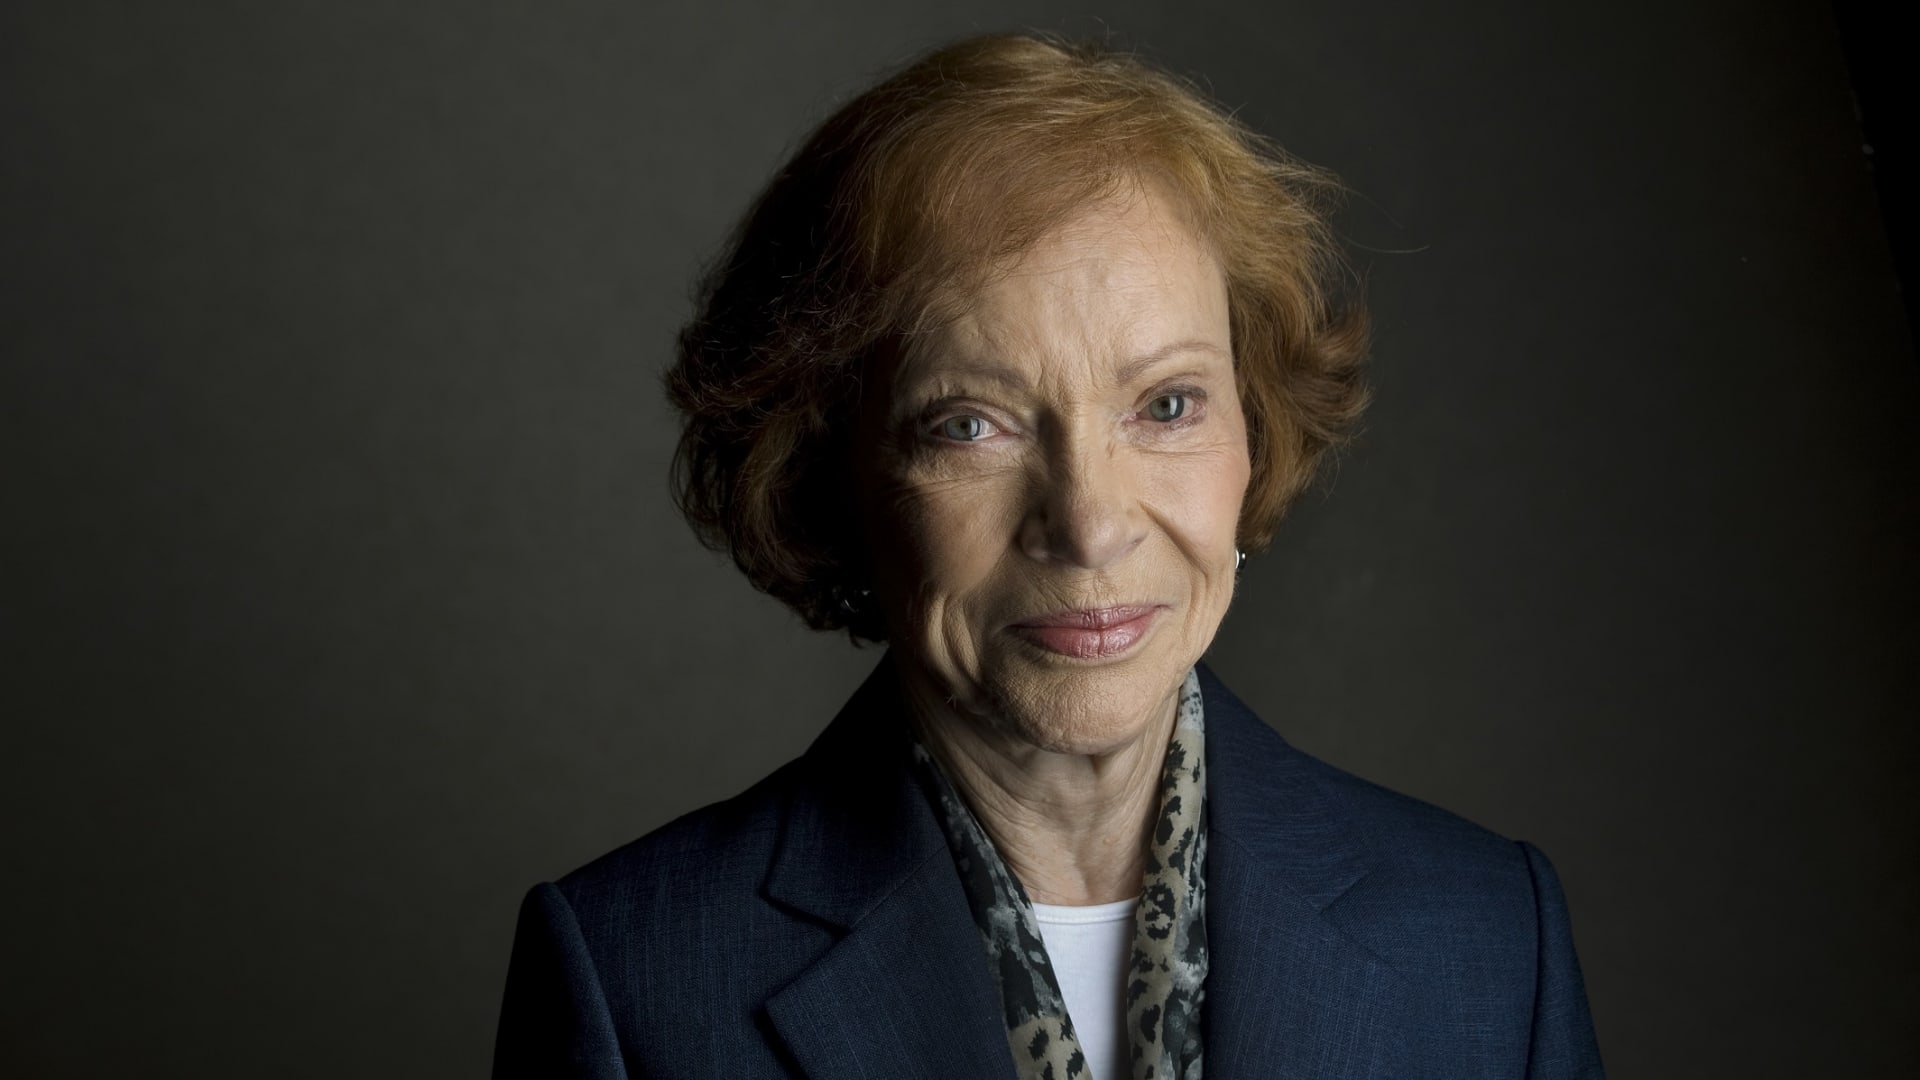 Rosalynn Carter, former first lady and tireless humanitarian who advocated for mental health issues, dies at 96